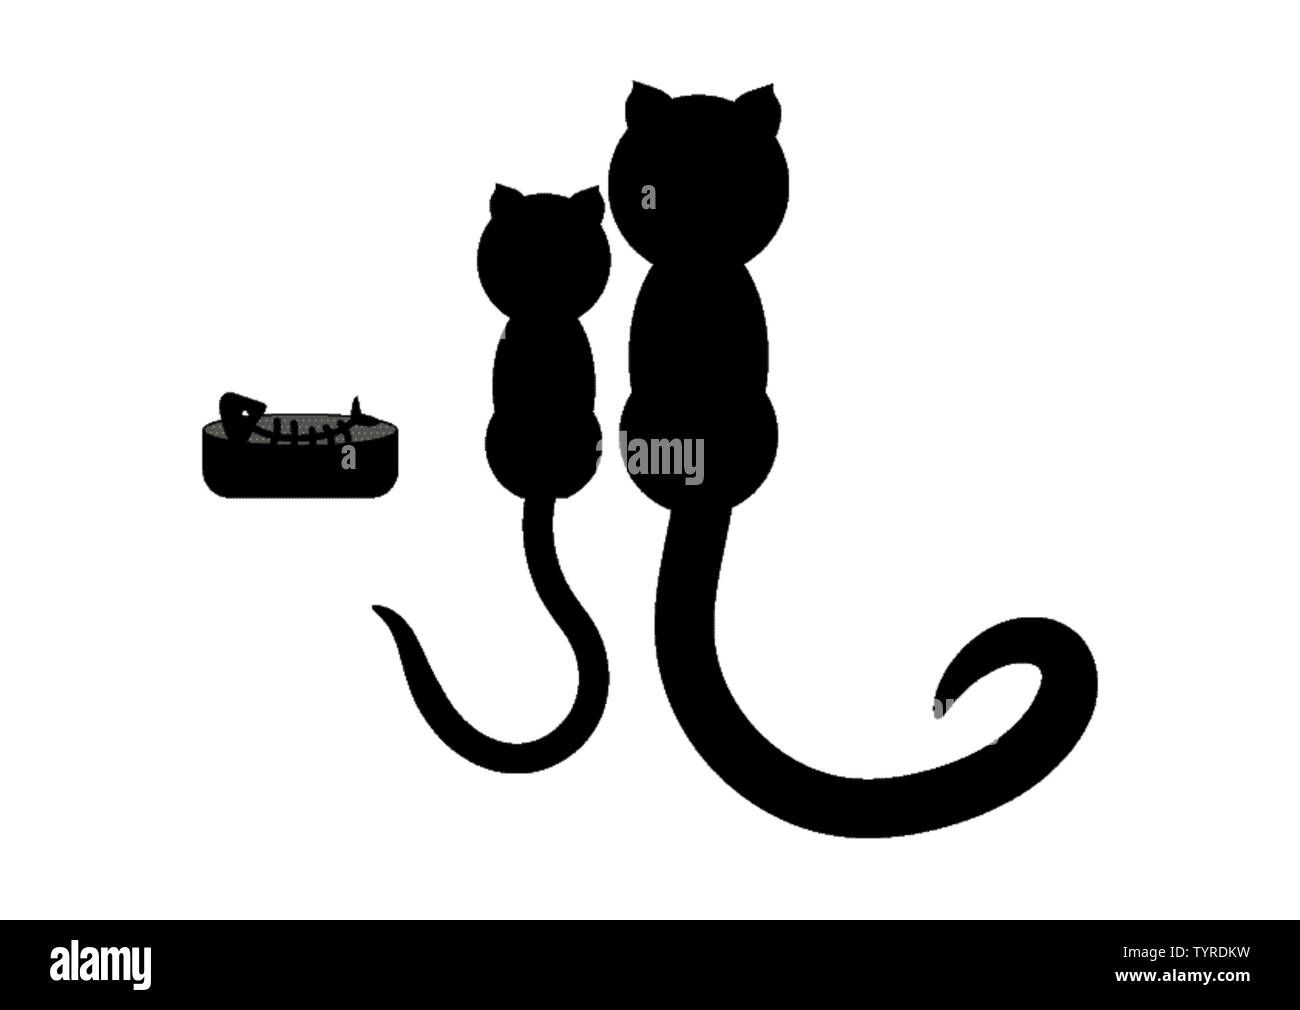 Cartoon illustration of a two cats sitting with the food bowl. Fish bone is in the bowl. It's a black silhouette. Stock Vector